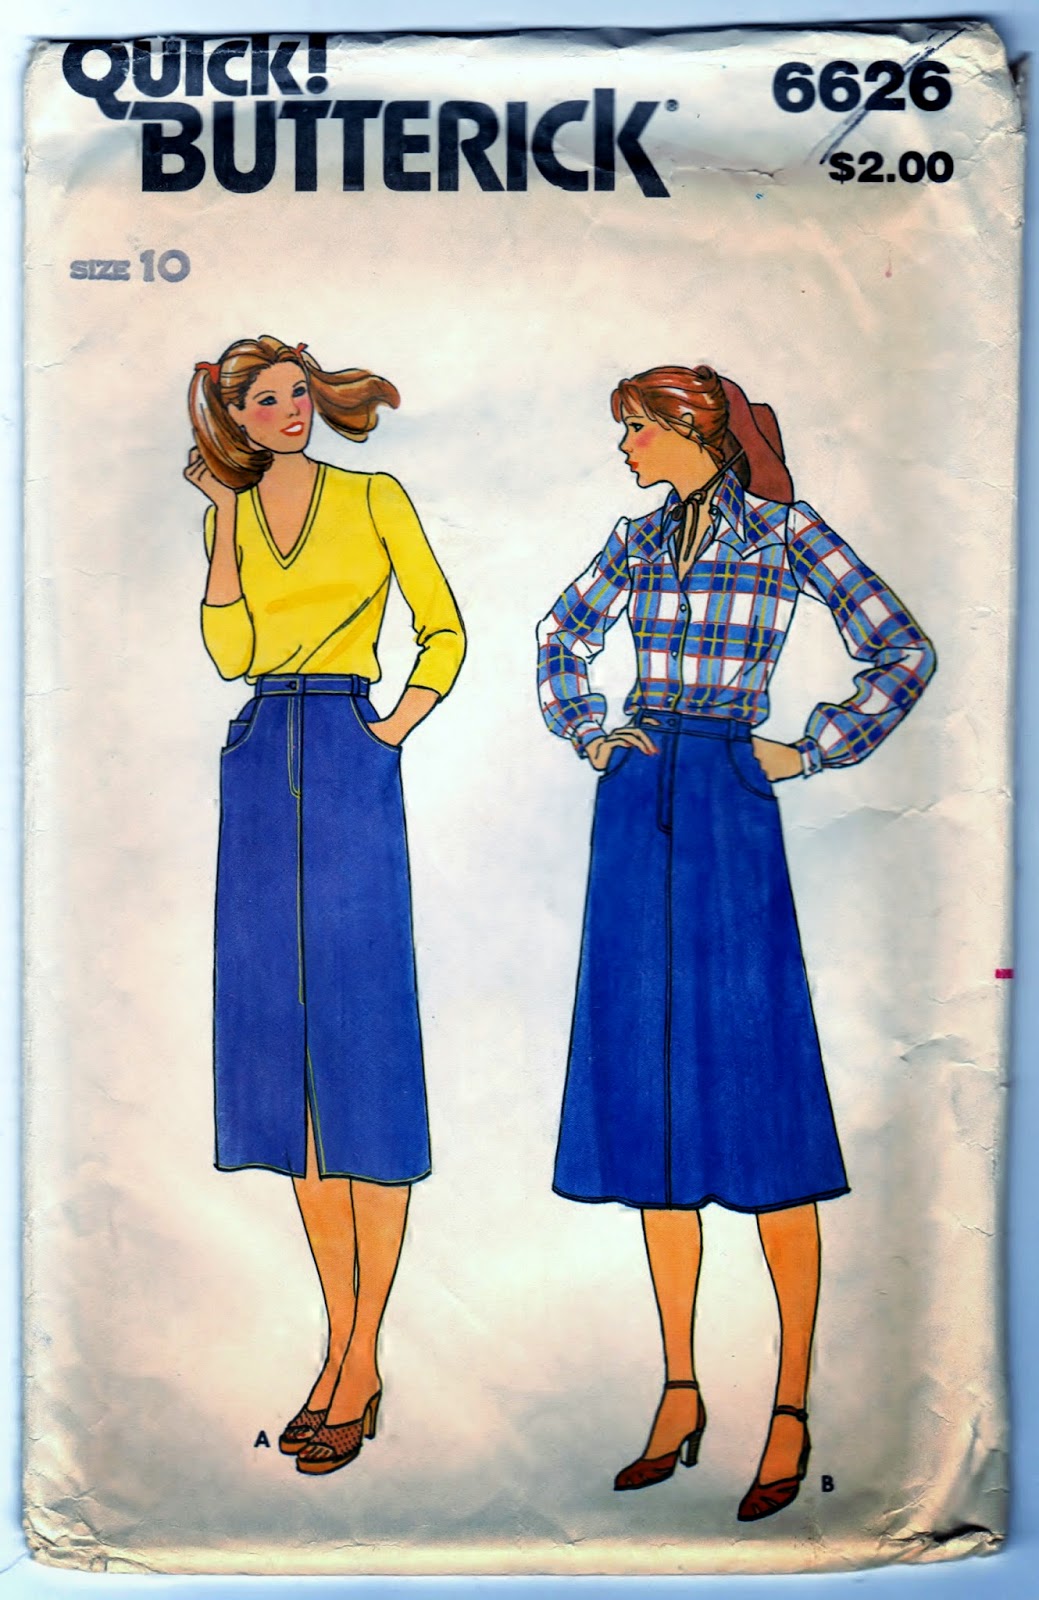 https://www.etsy.com/listing/219070346/butterick-6626-sewing-pattern-quick